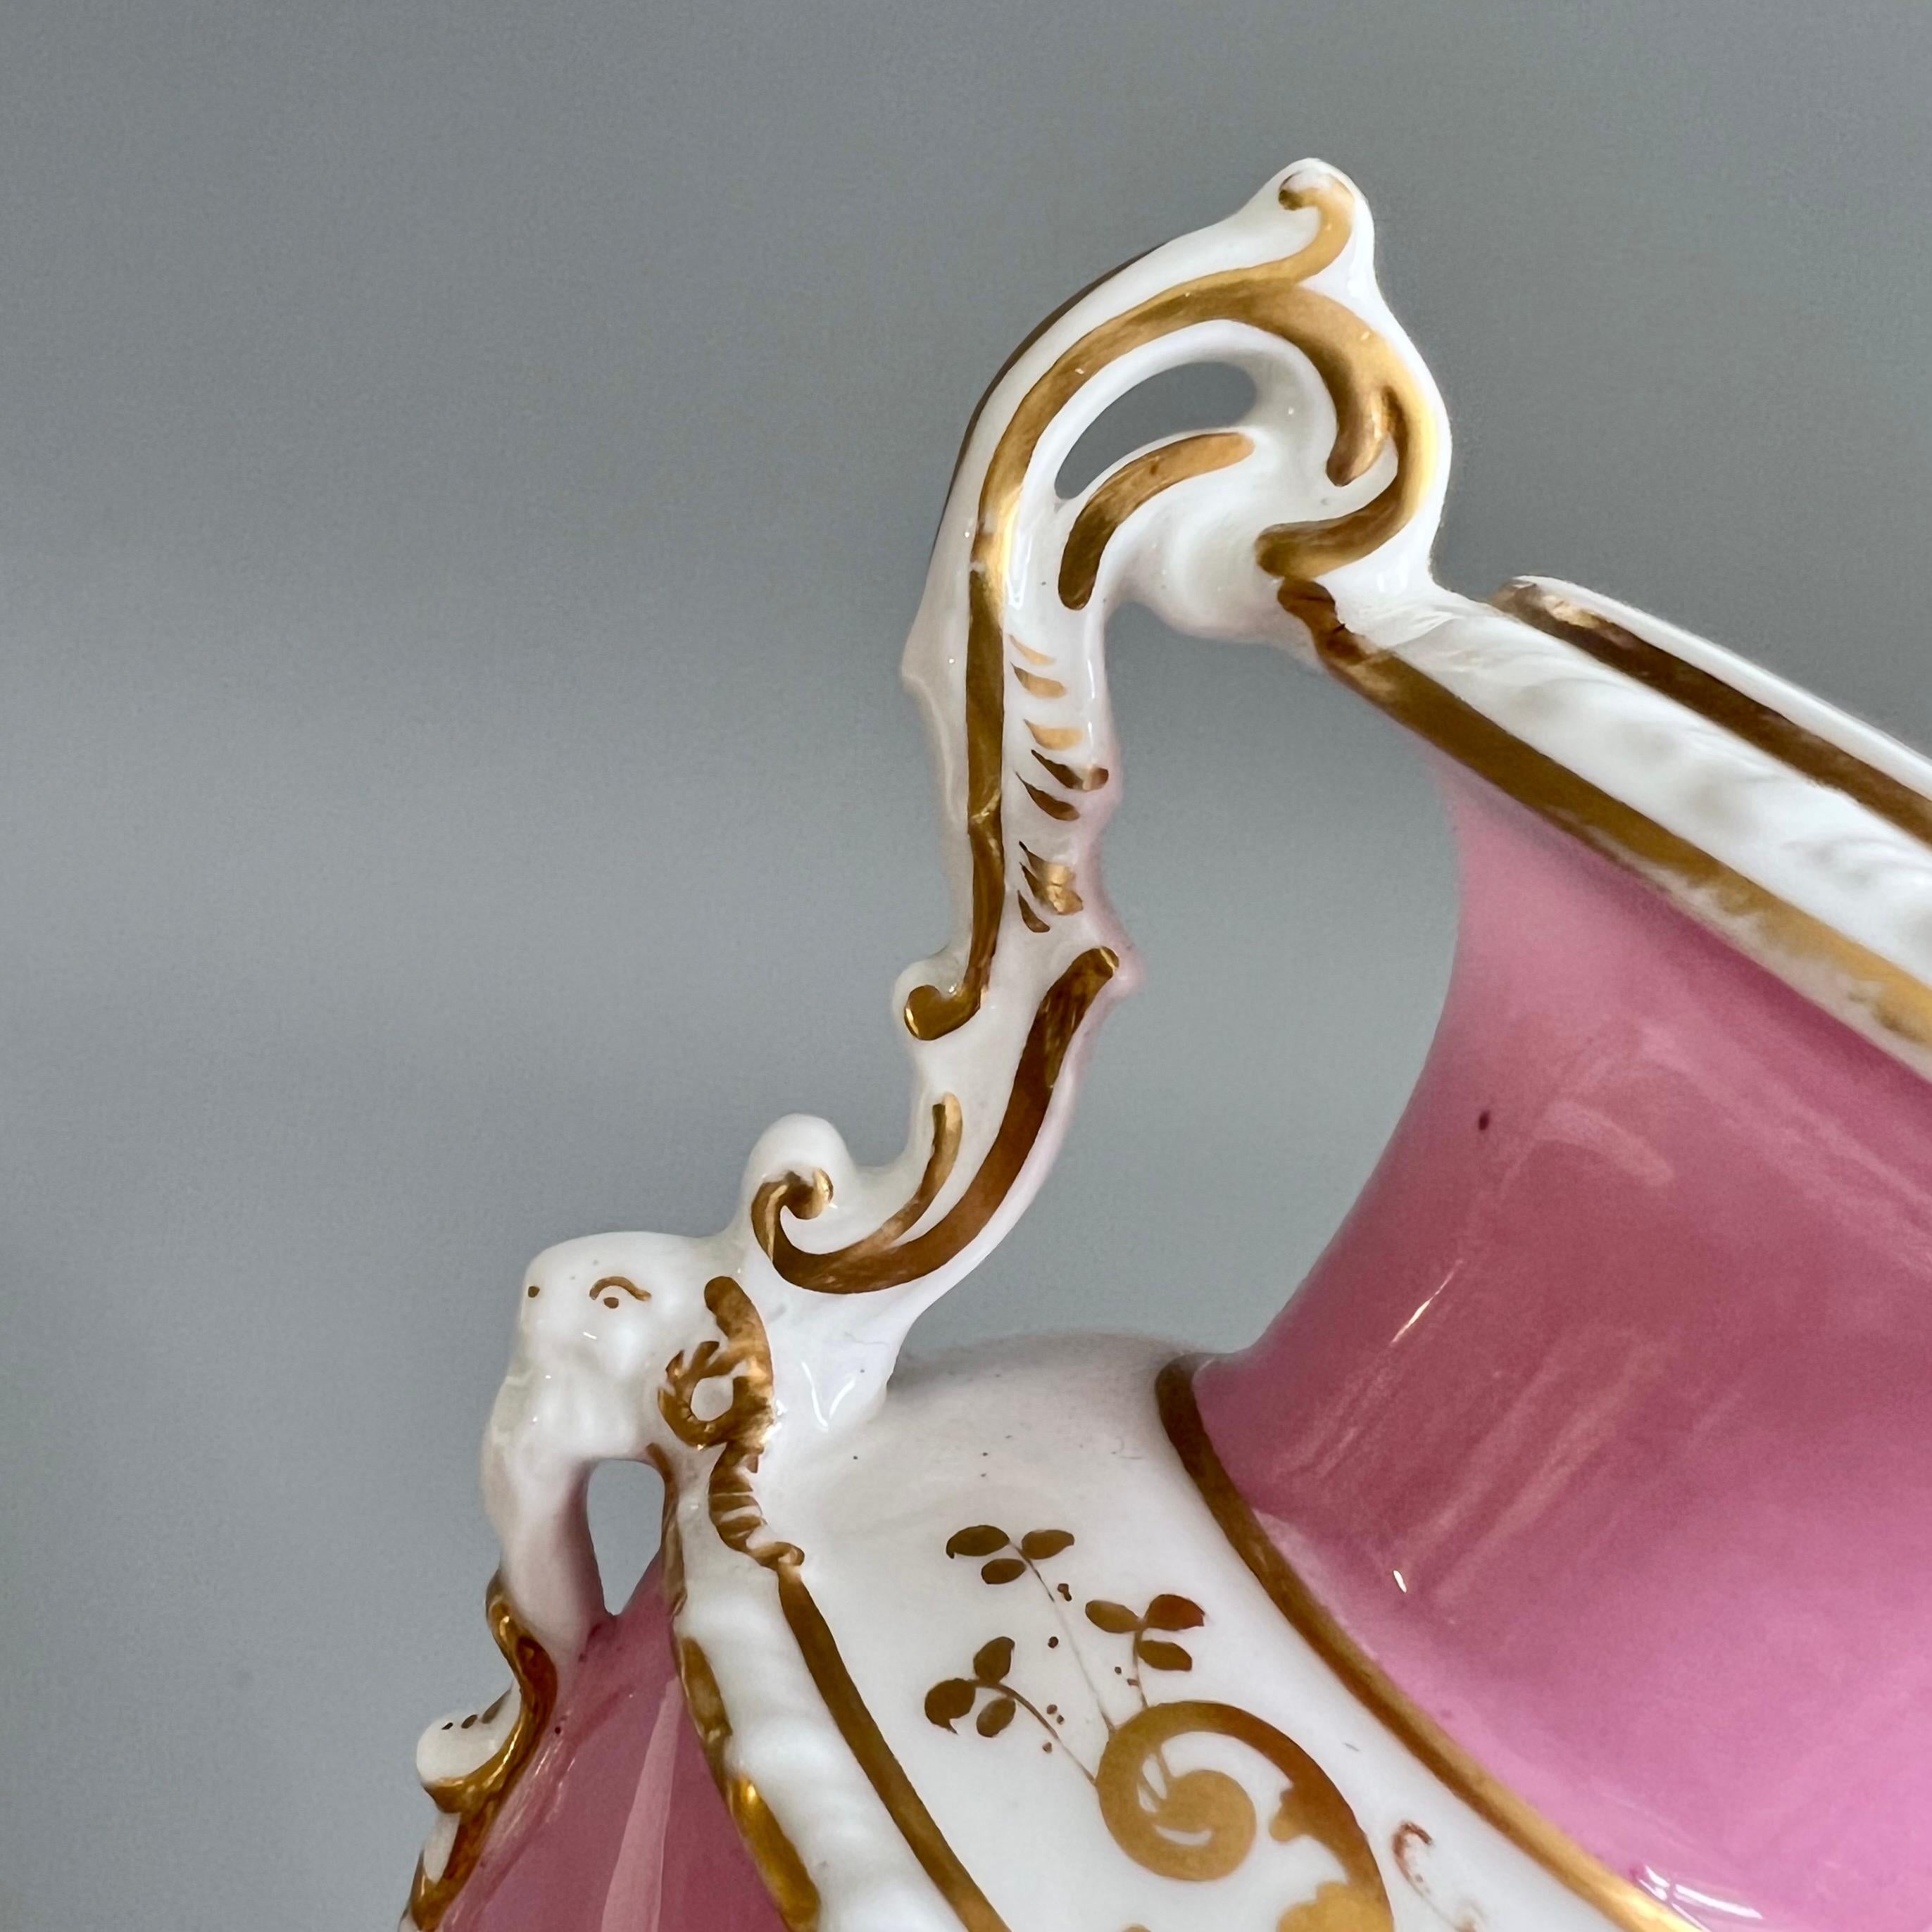 Porcelain Minton Small Vase, Elgin Shape Pink with Floral Reserve, Rococo Revival ca 1835